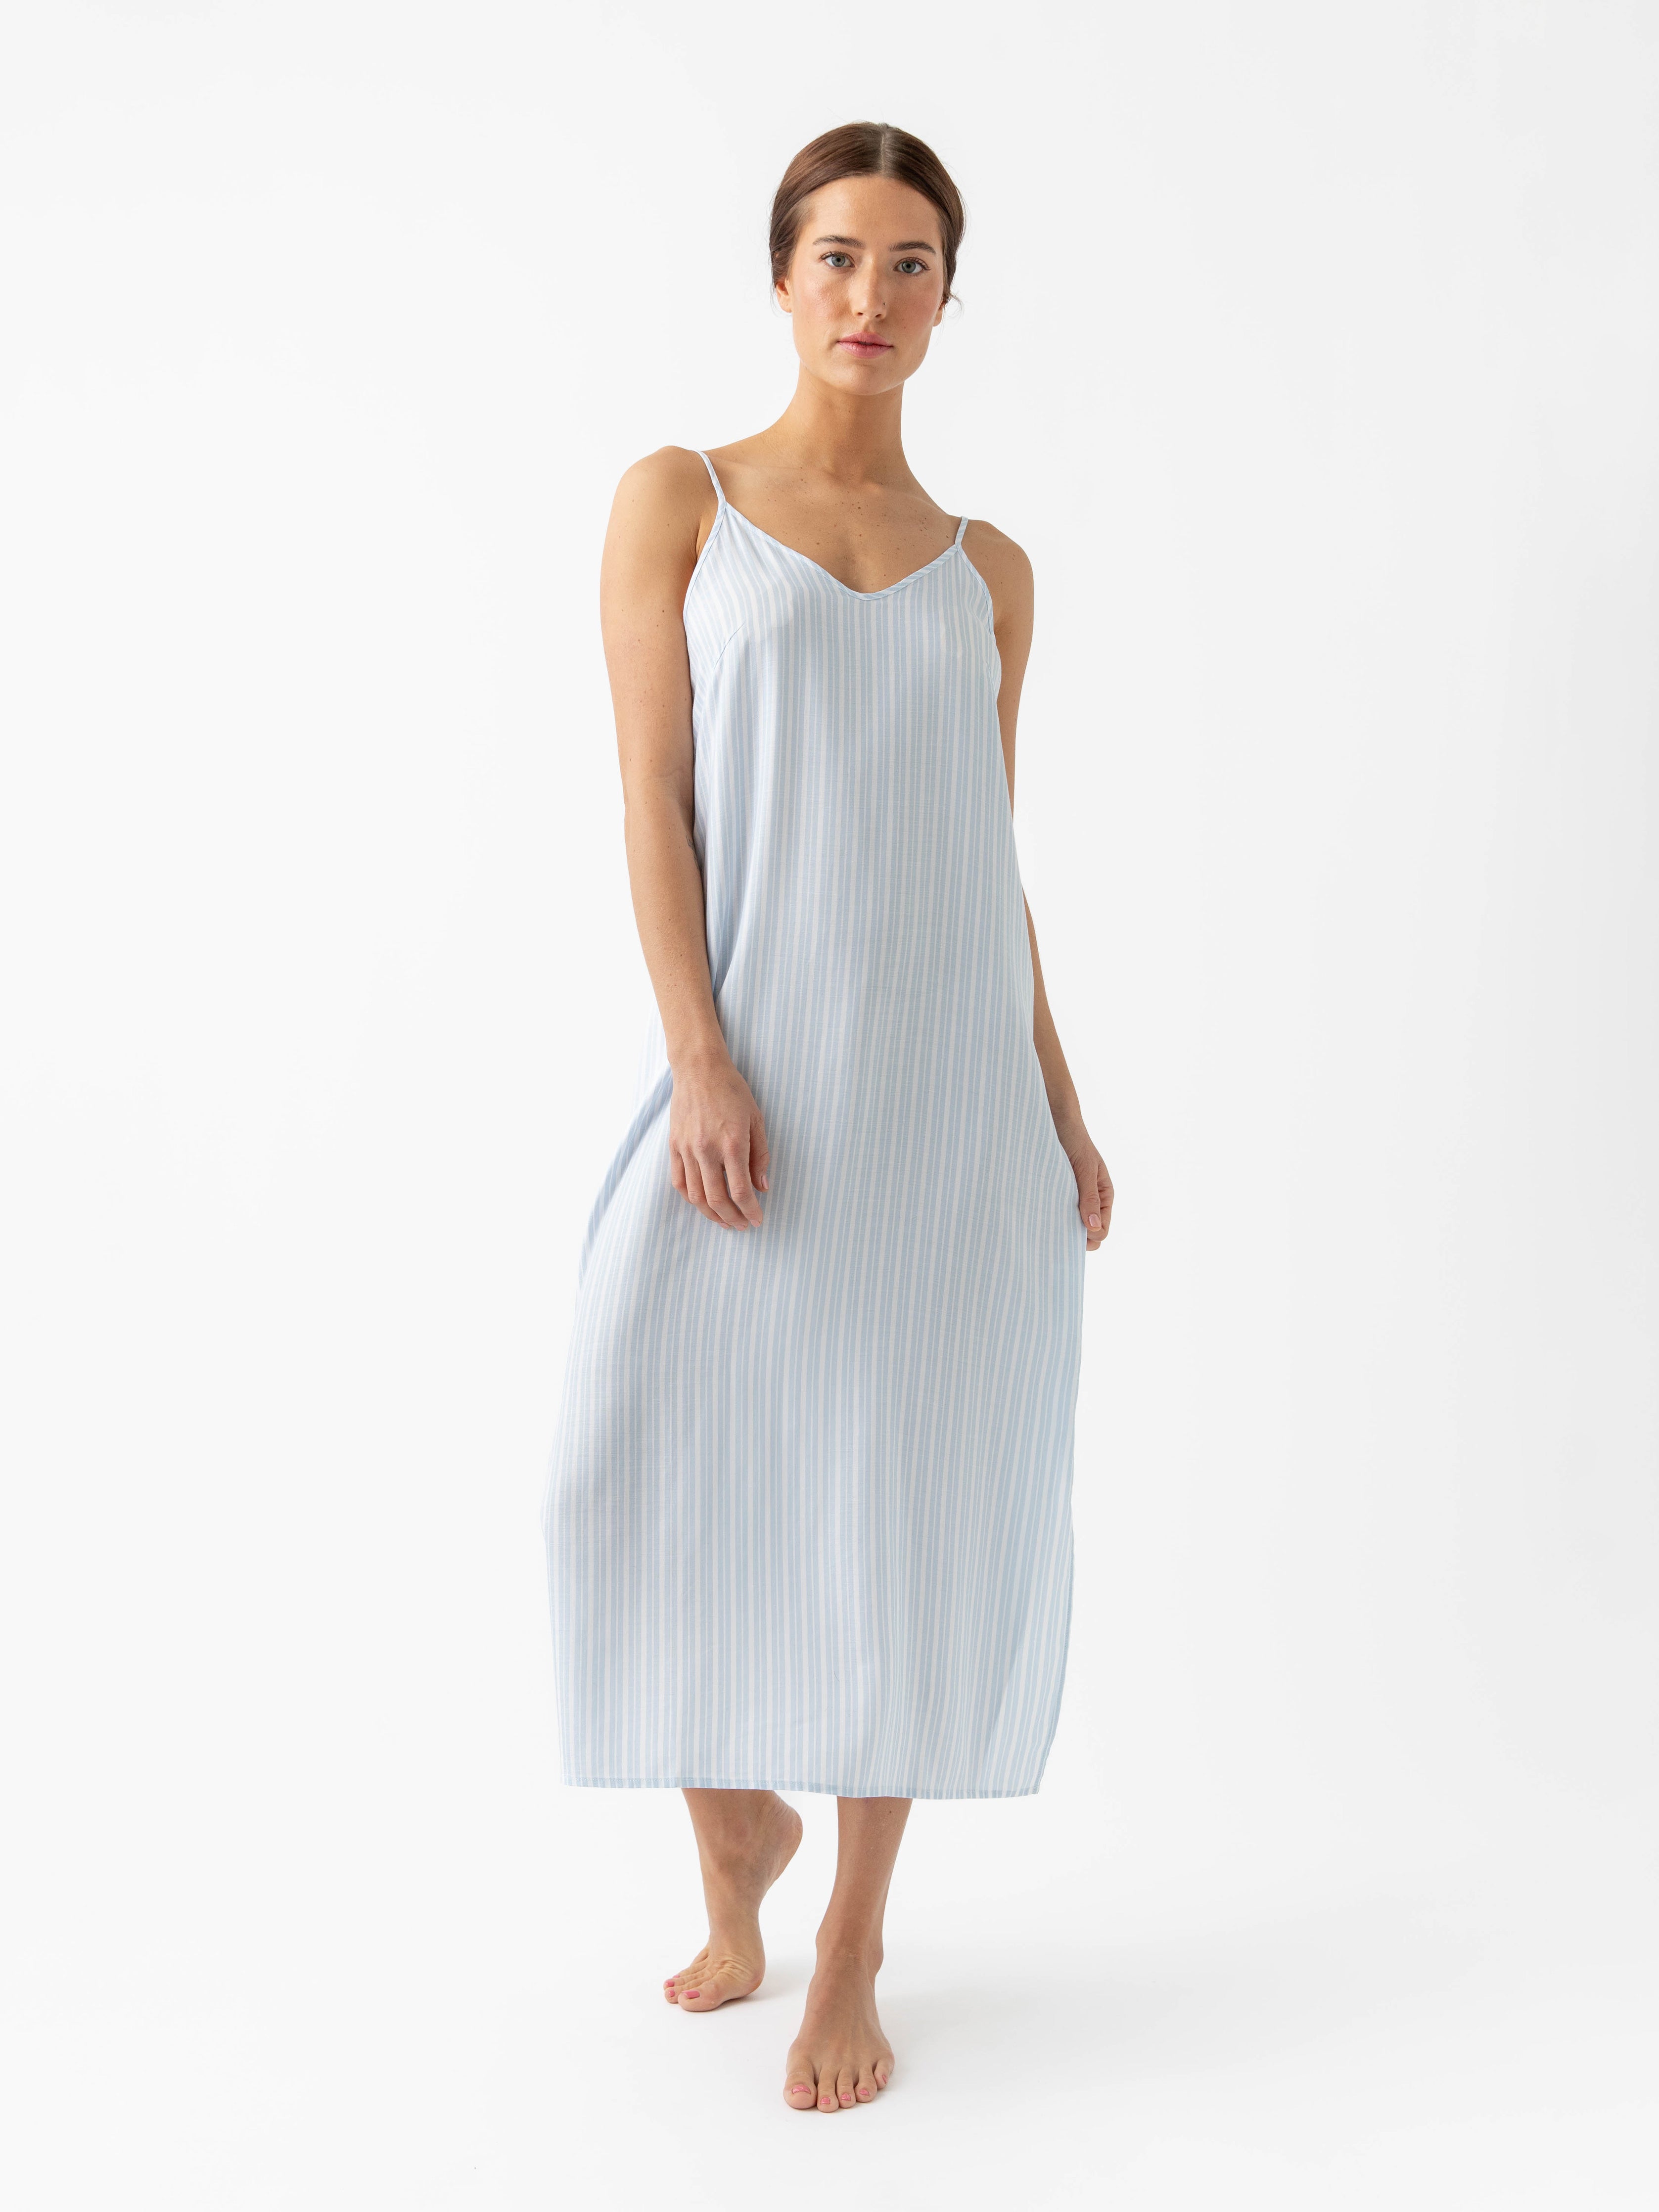 Woman in Spring Blue Stripe nightgown standing in front of white background |Color:Spring Blue Stripe